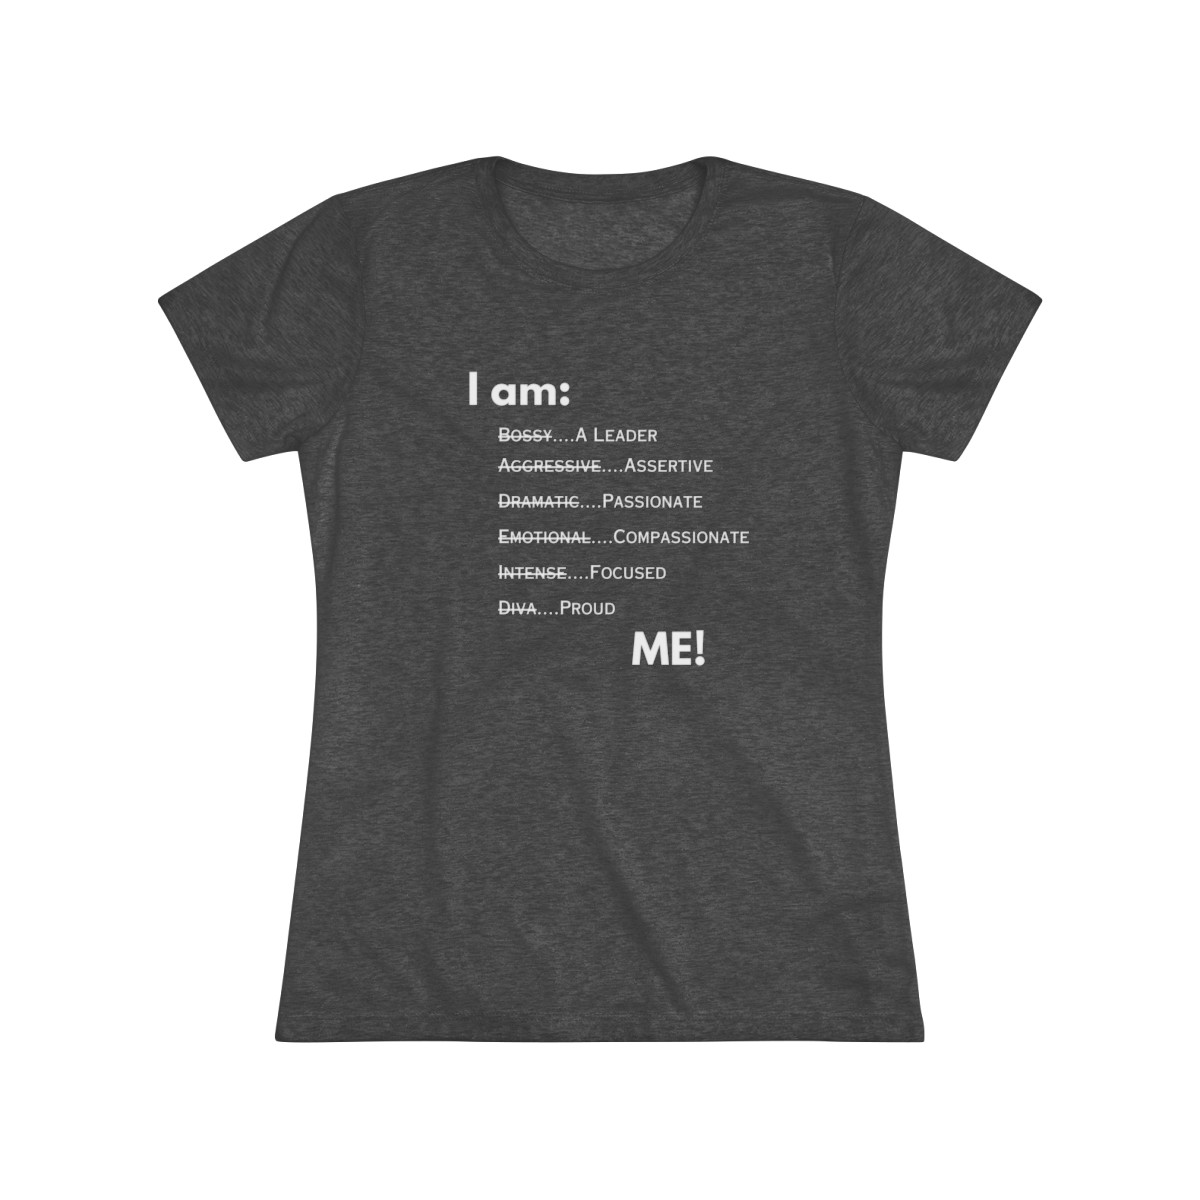  Women's WORDS Triblend Tee  product thumbnail image